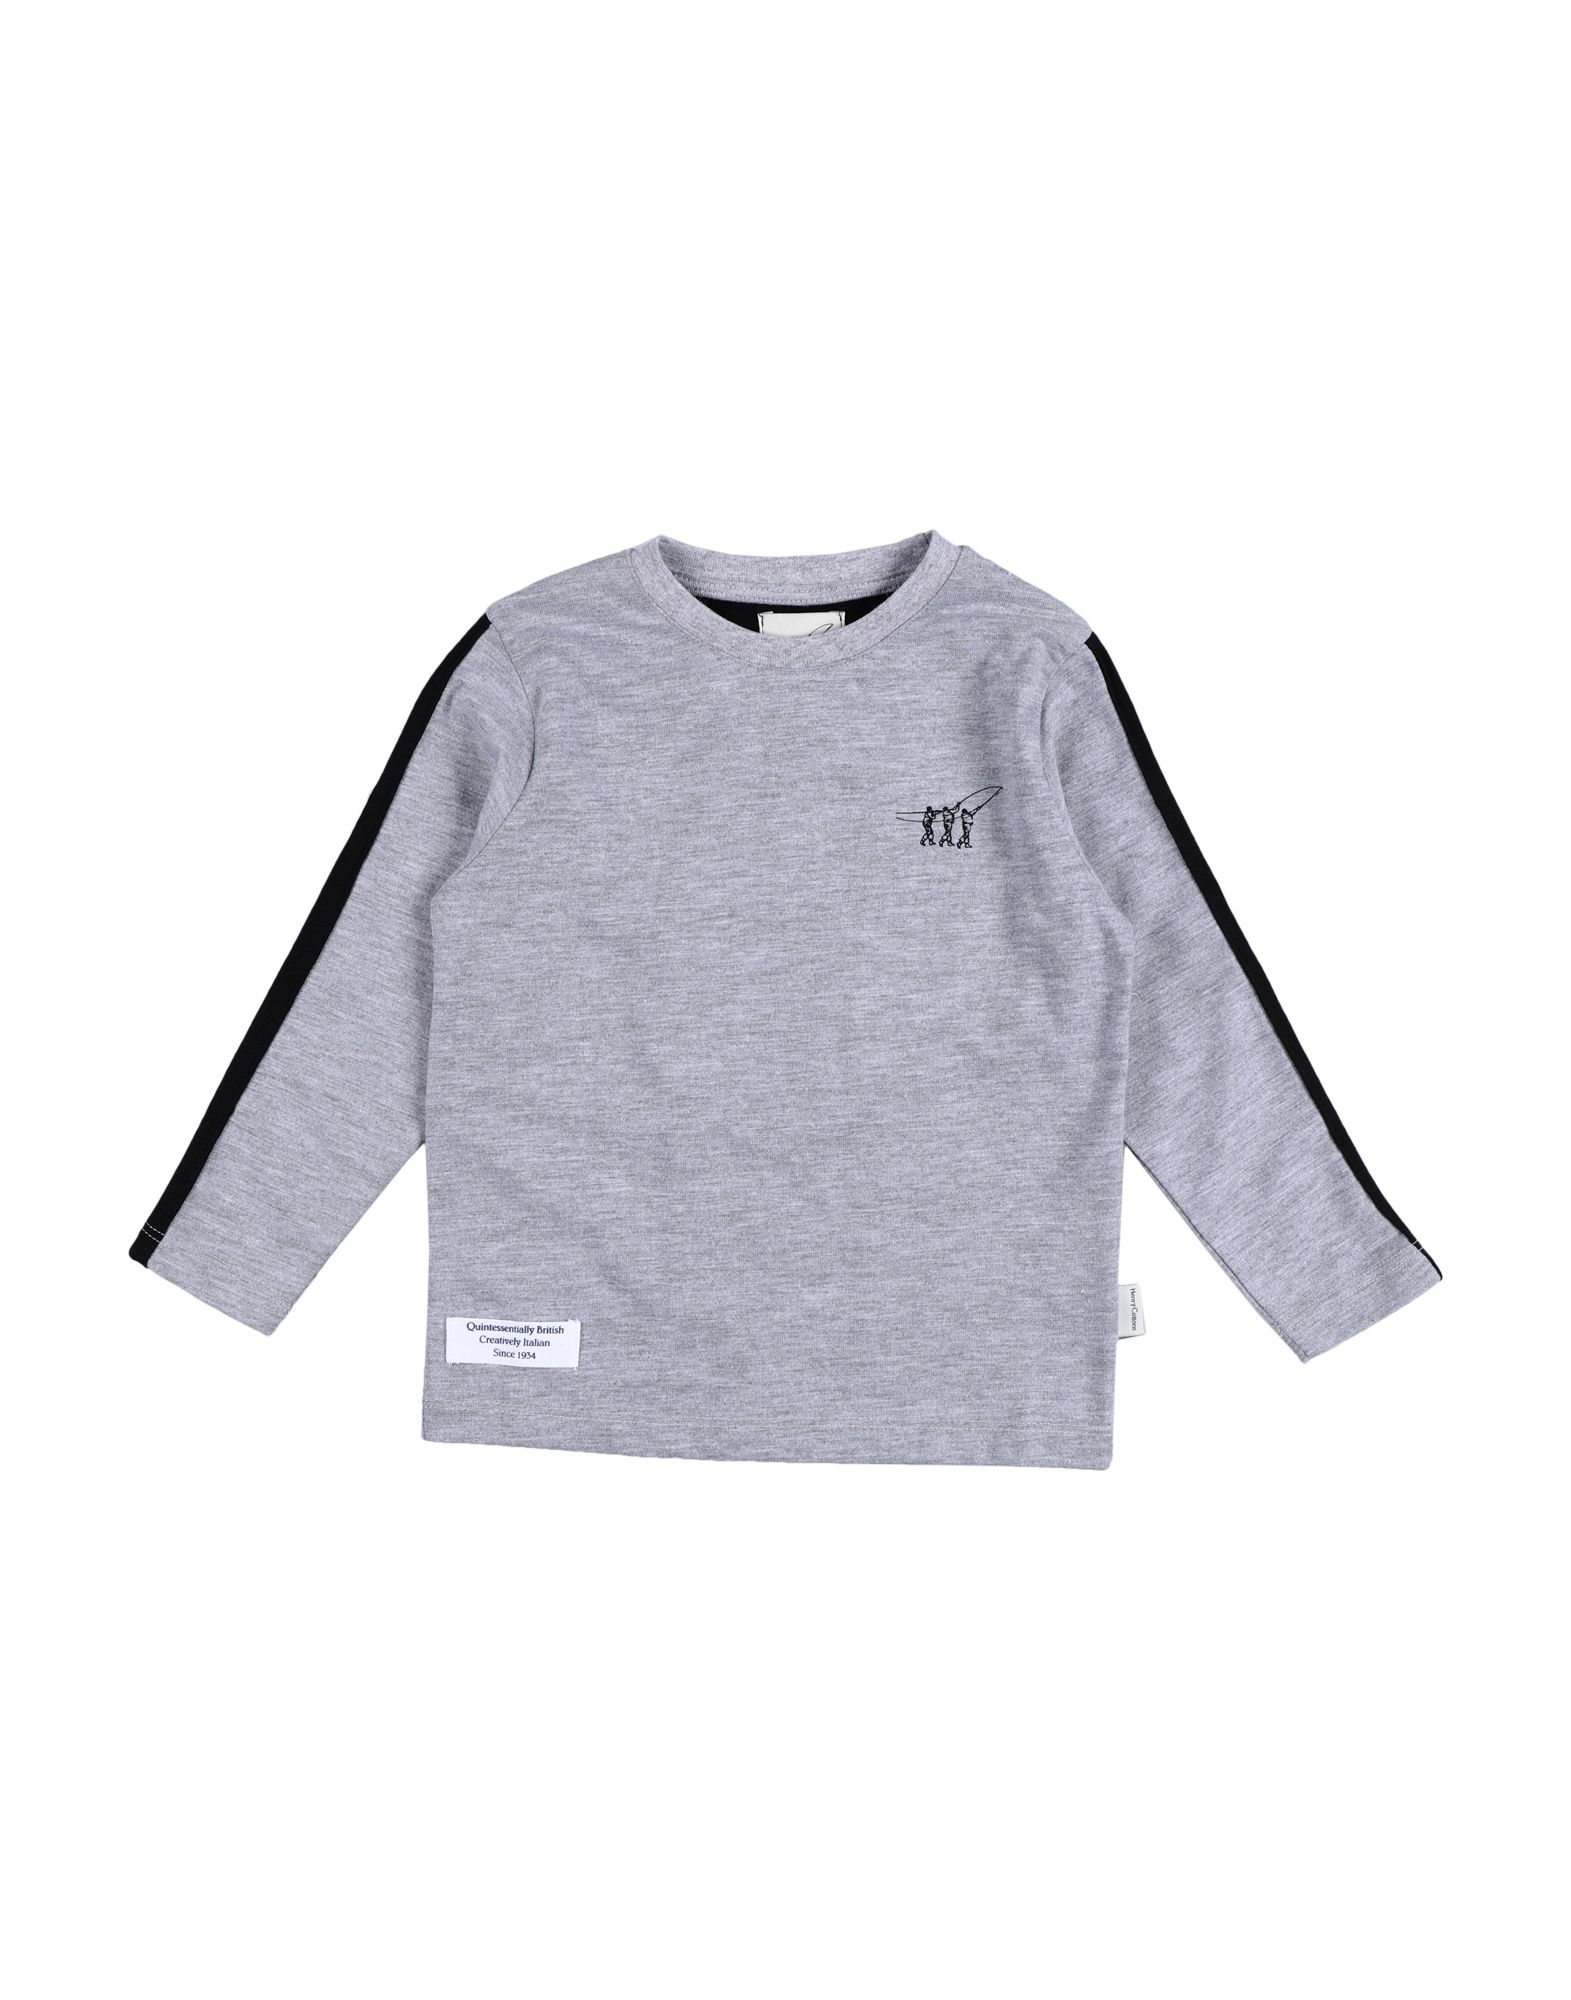 Henry Cotton's Kids' T-shirts In Grey